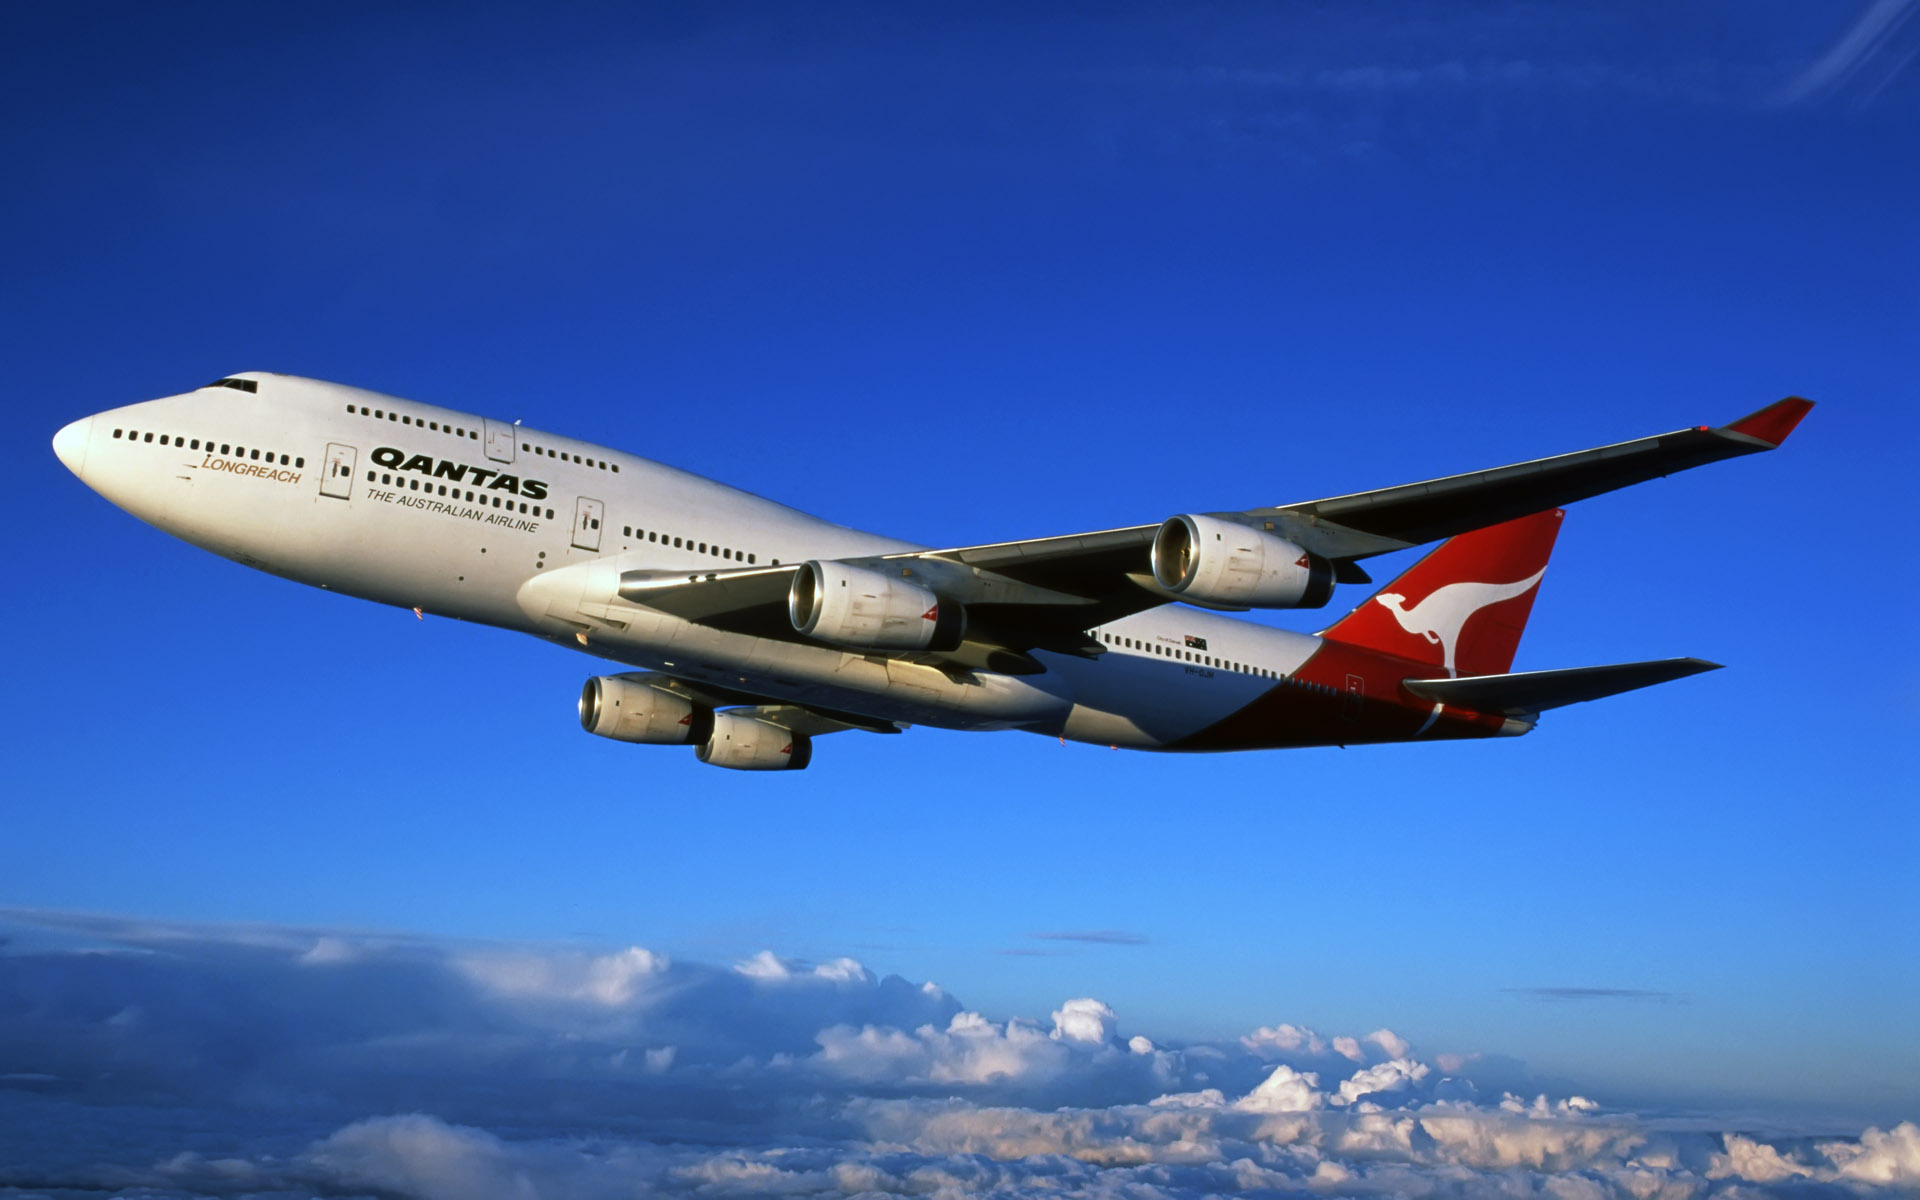 Australian Airlines wallpapers and images - wallpapers ...